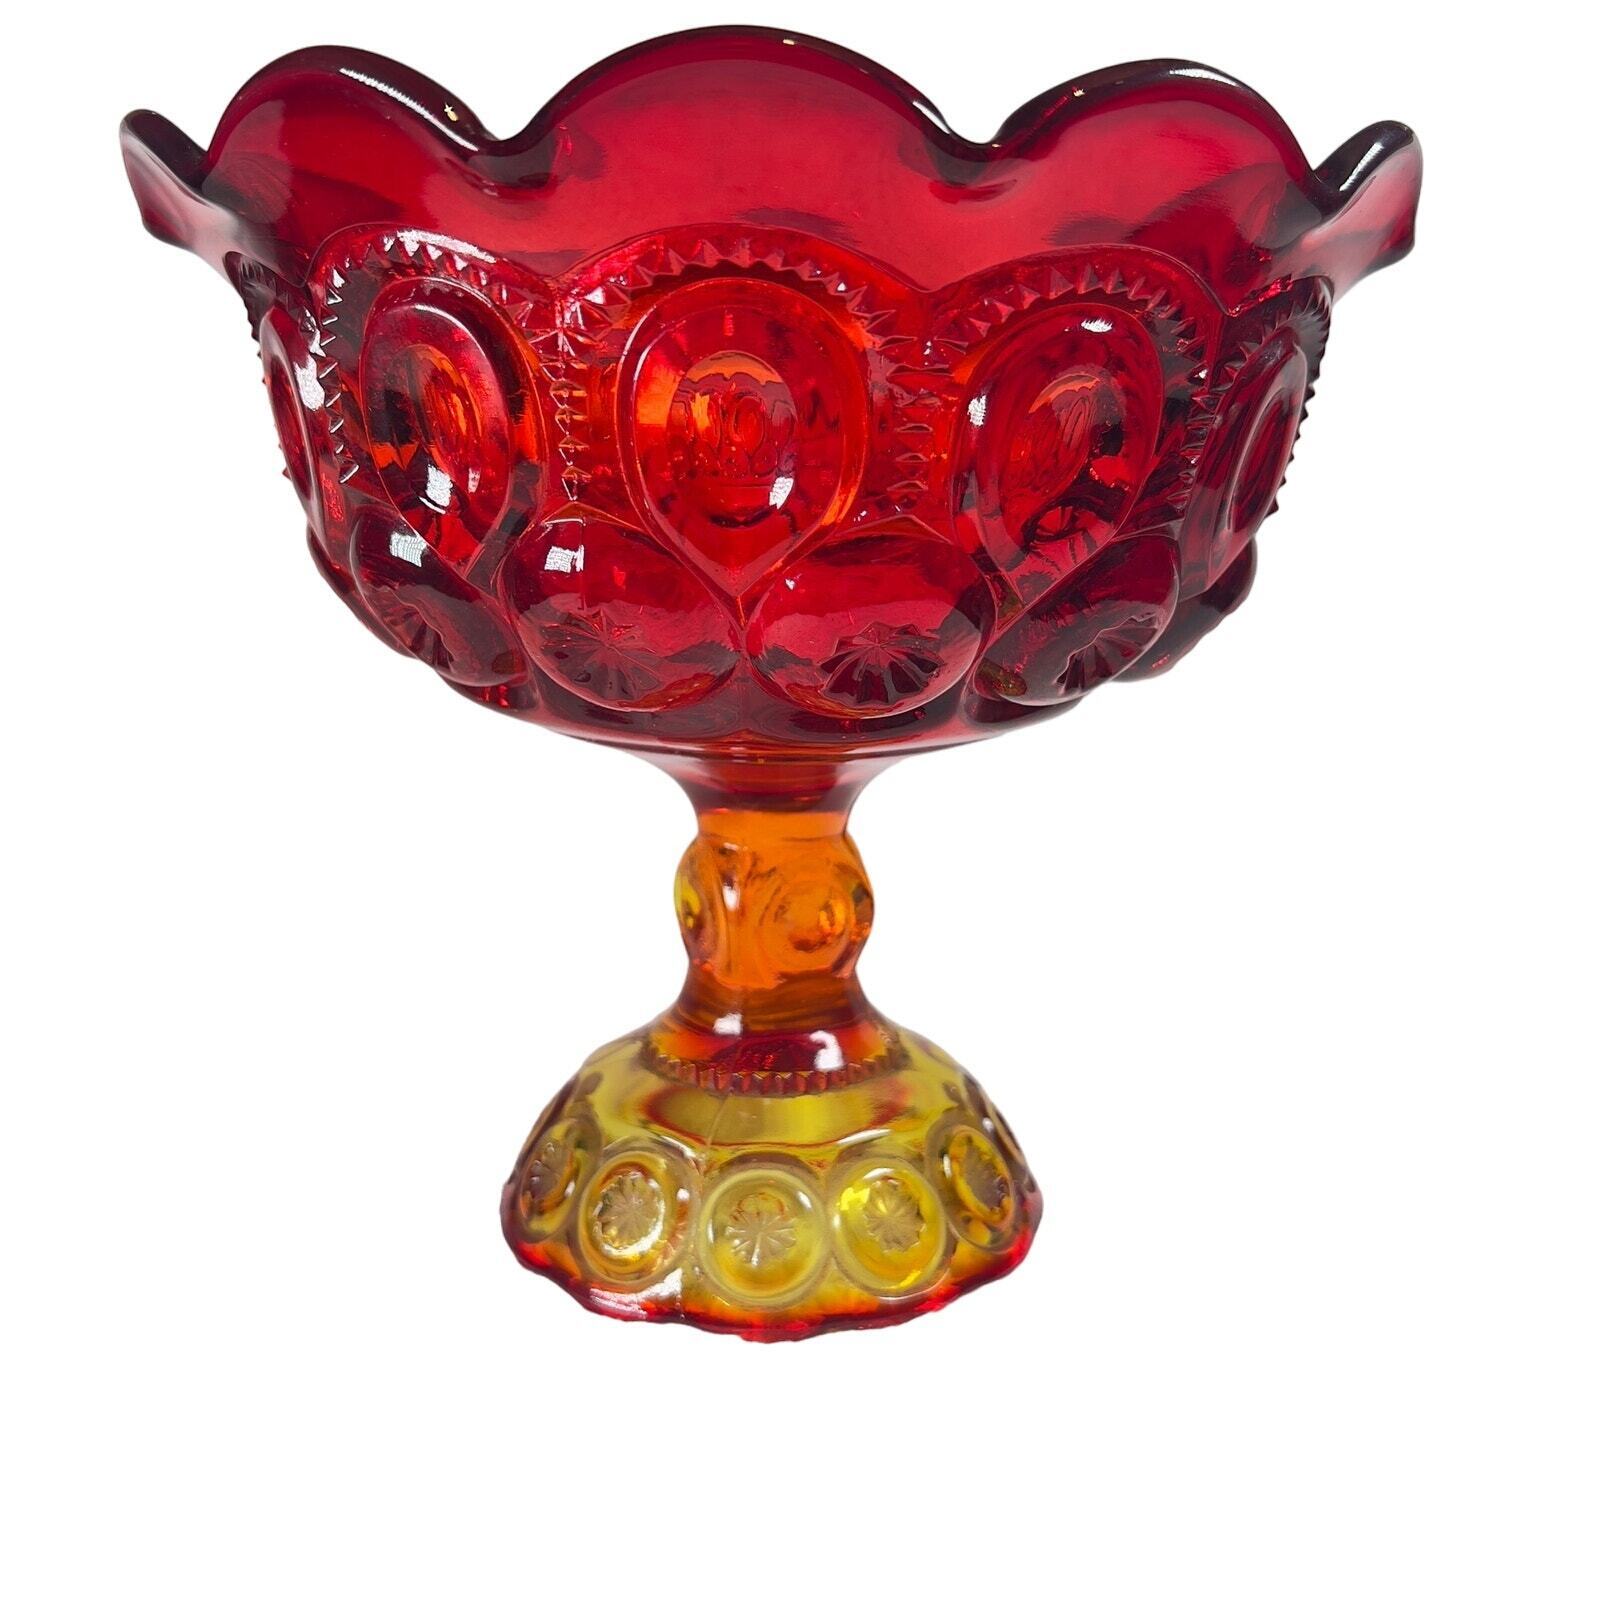 L E Smith Vintage Victorian Amberina Carnival Glass Compote Bowl Amber Red Fruit